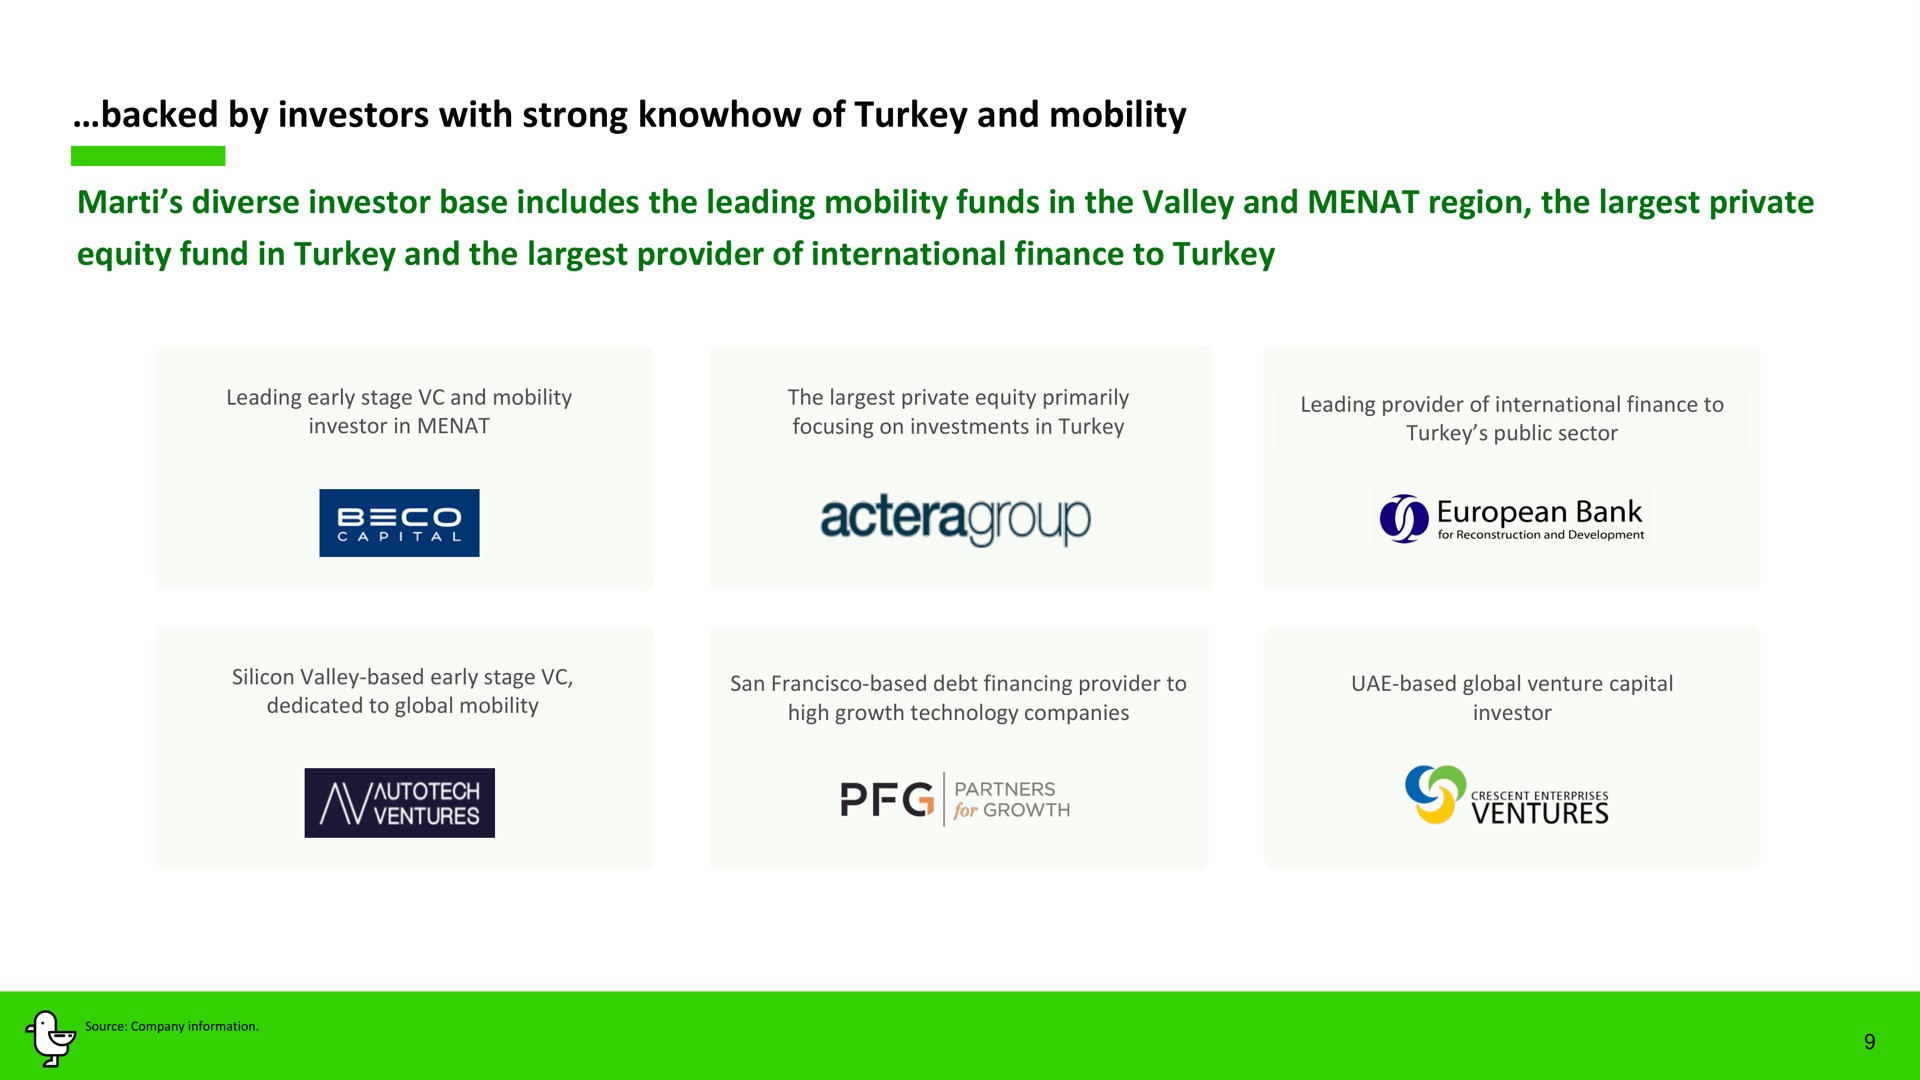 backed by investors with strong of turkey and mobility diverse investor base includes the leading mobility funds in the valley and region the private equity fund in turkey and the provider of international finance to turkey bank | Marti